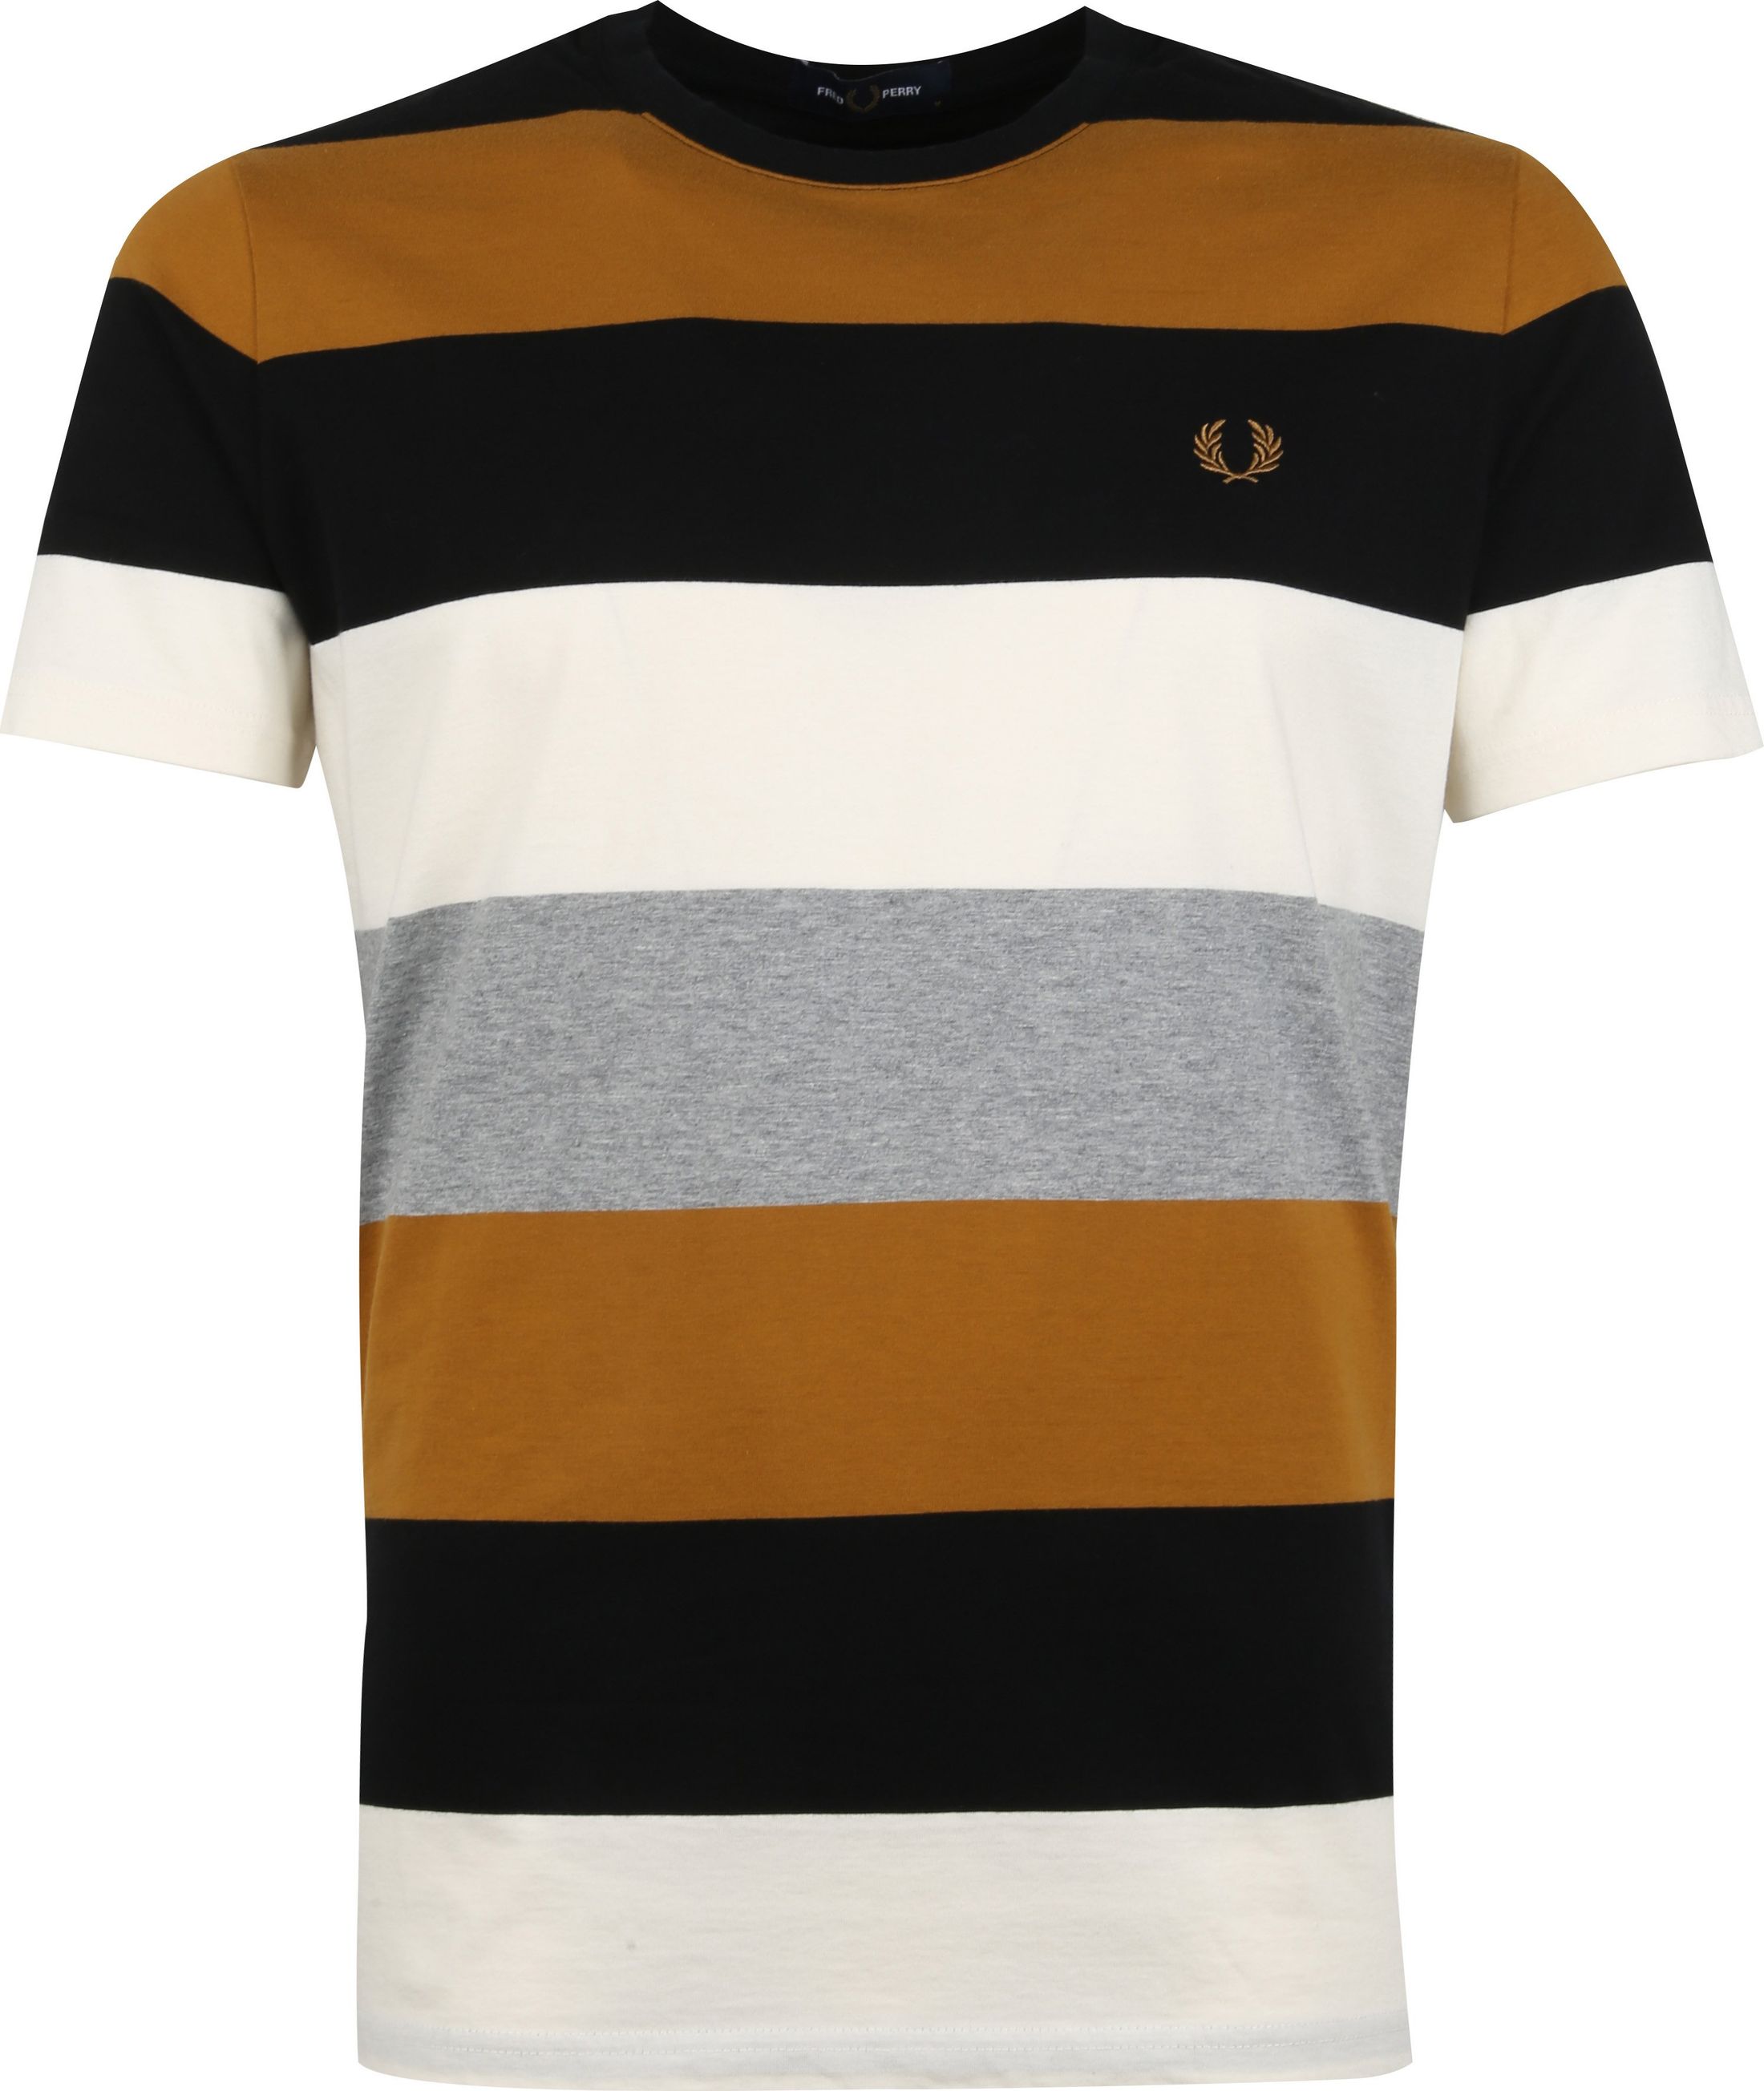 Fred Perry T-Shirt M3546 Caramel Multicolour Brown size L